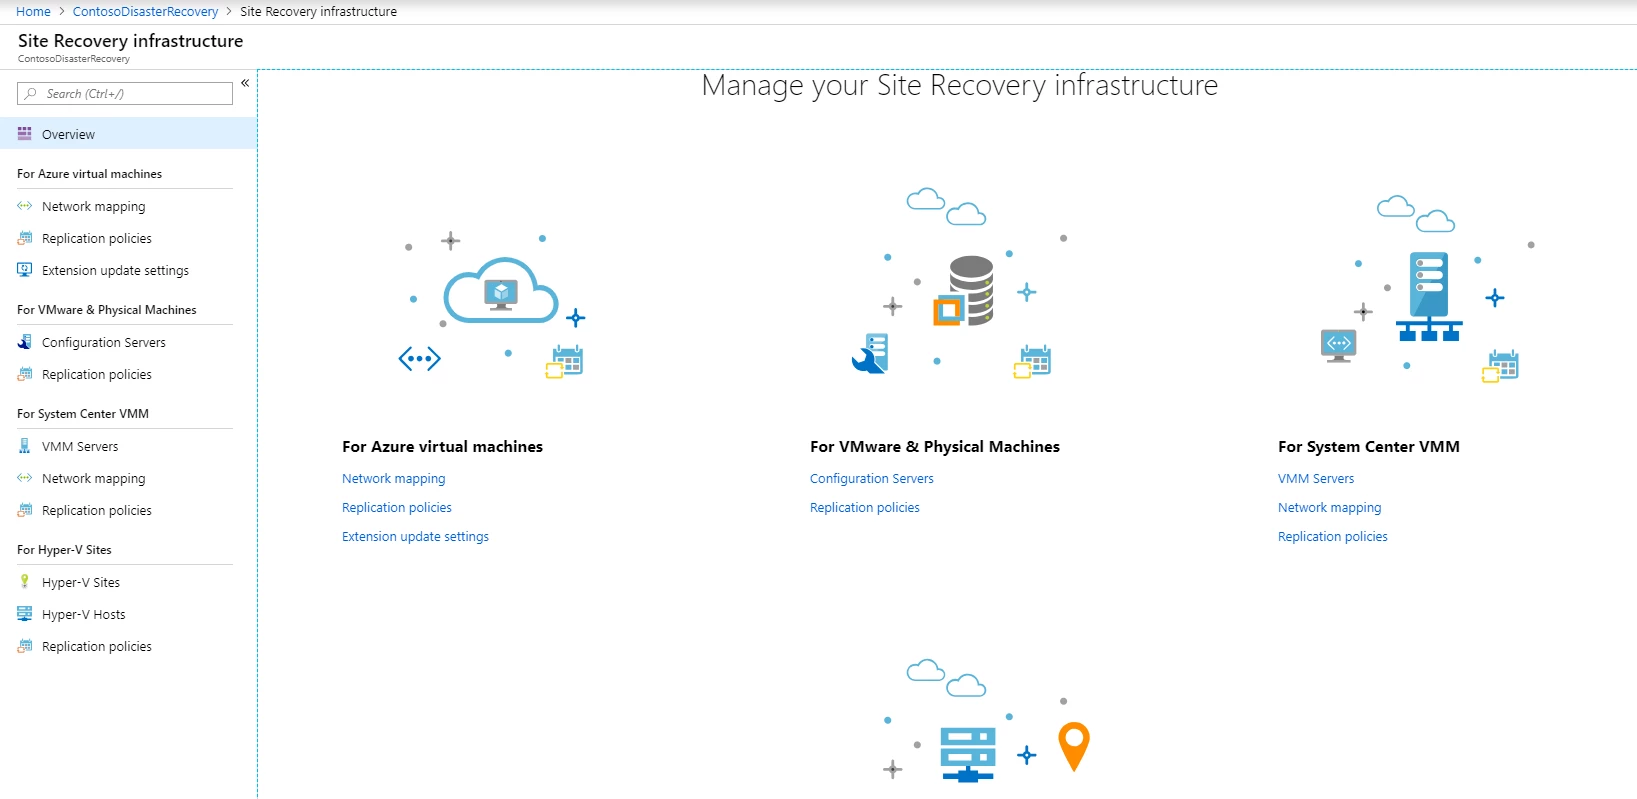 Screenshot of Site Recovery infrastructure